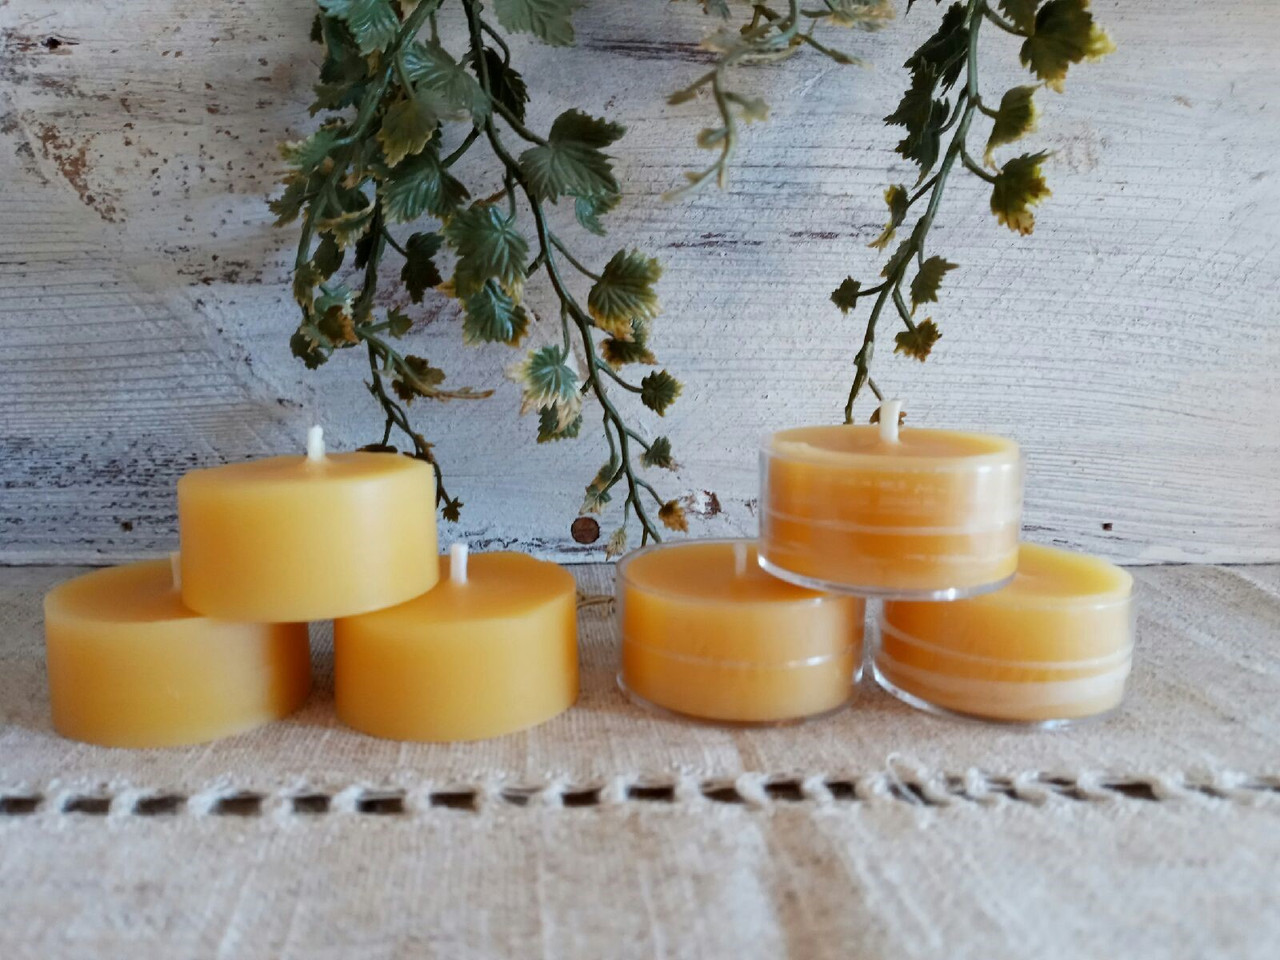  100 Tealight Beeswax Candles BULK 100% Natural Handcrafted in  USA/Aluminum Cup Tea Lights/Wedding/Event/Party/Holiday/Clean Burning  Emergency Candle/Unscented/Allergy Friendly/Natural Honey Aroma : Home &  Kitchen